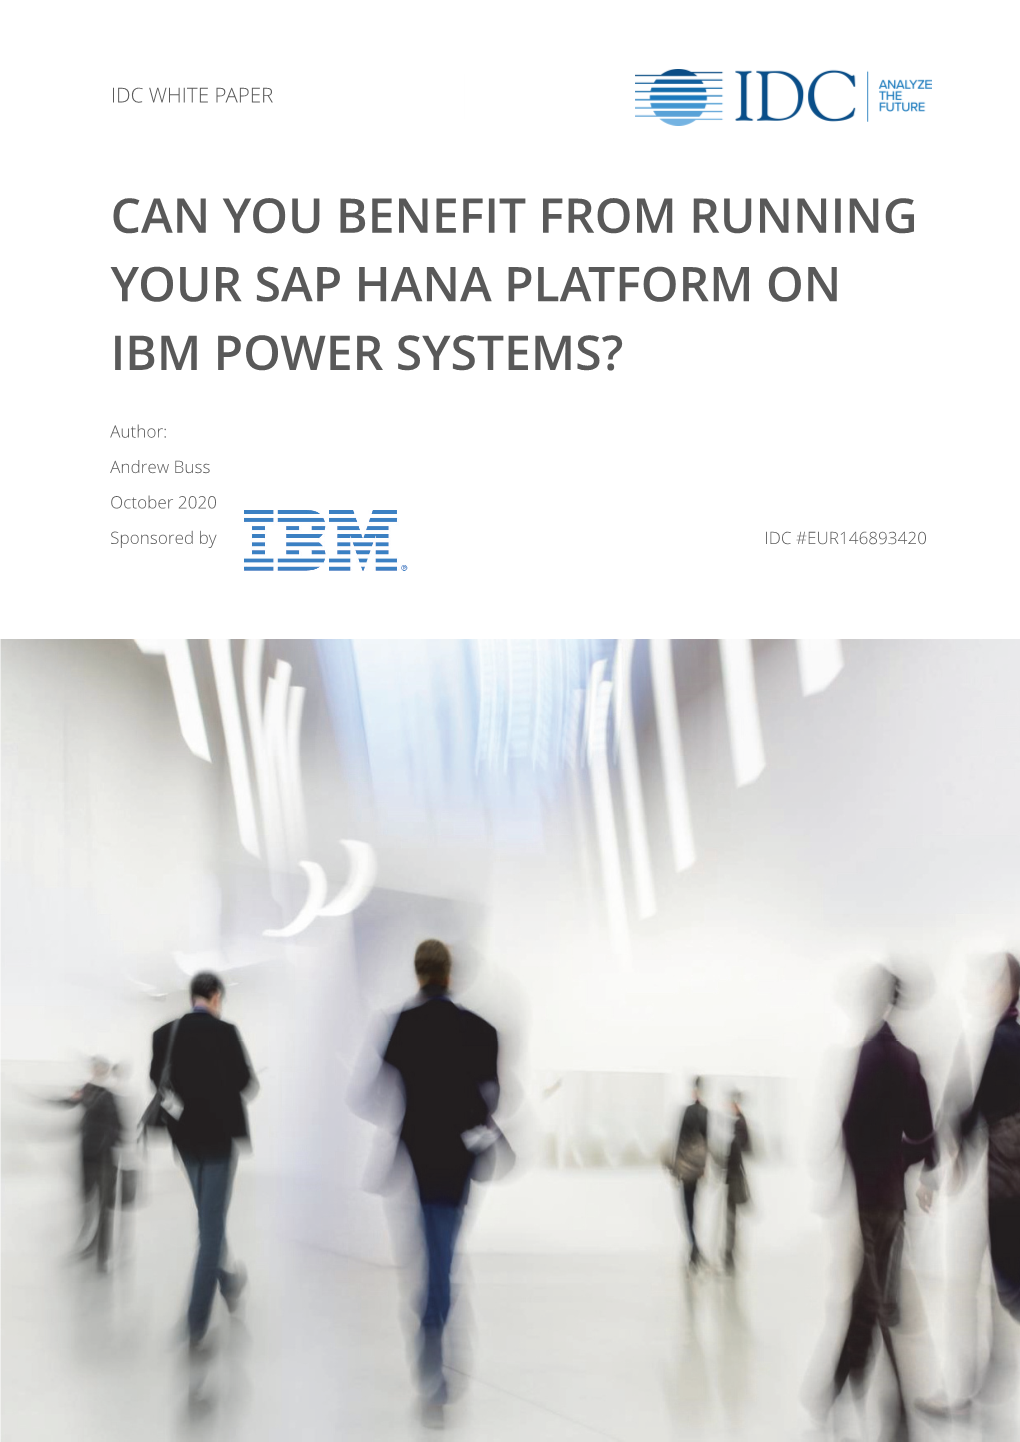 Can You Benefit from Running Your Sap Hana Platform on Ibm Power Systems?